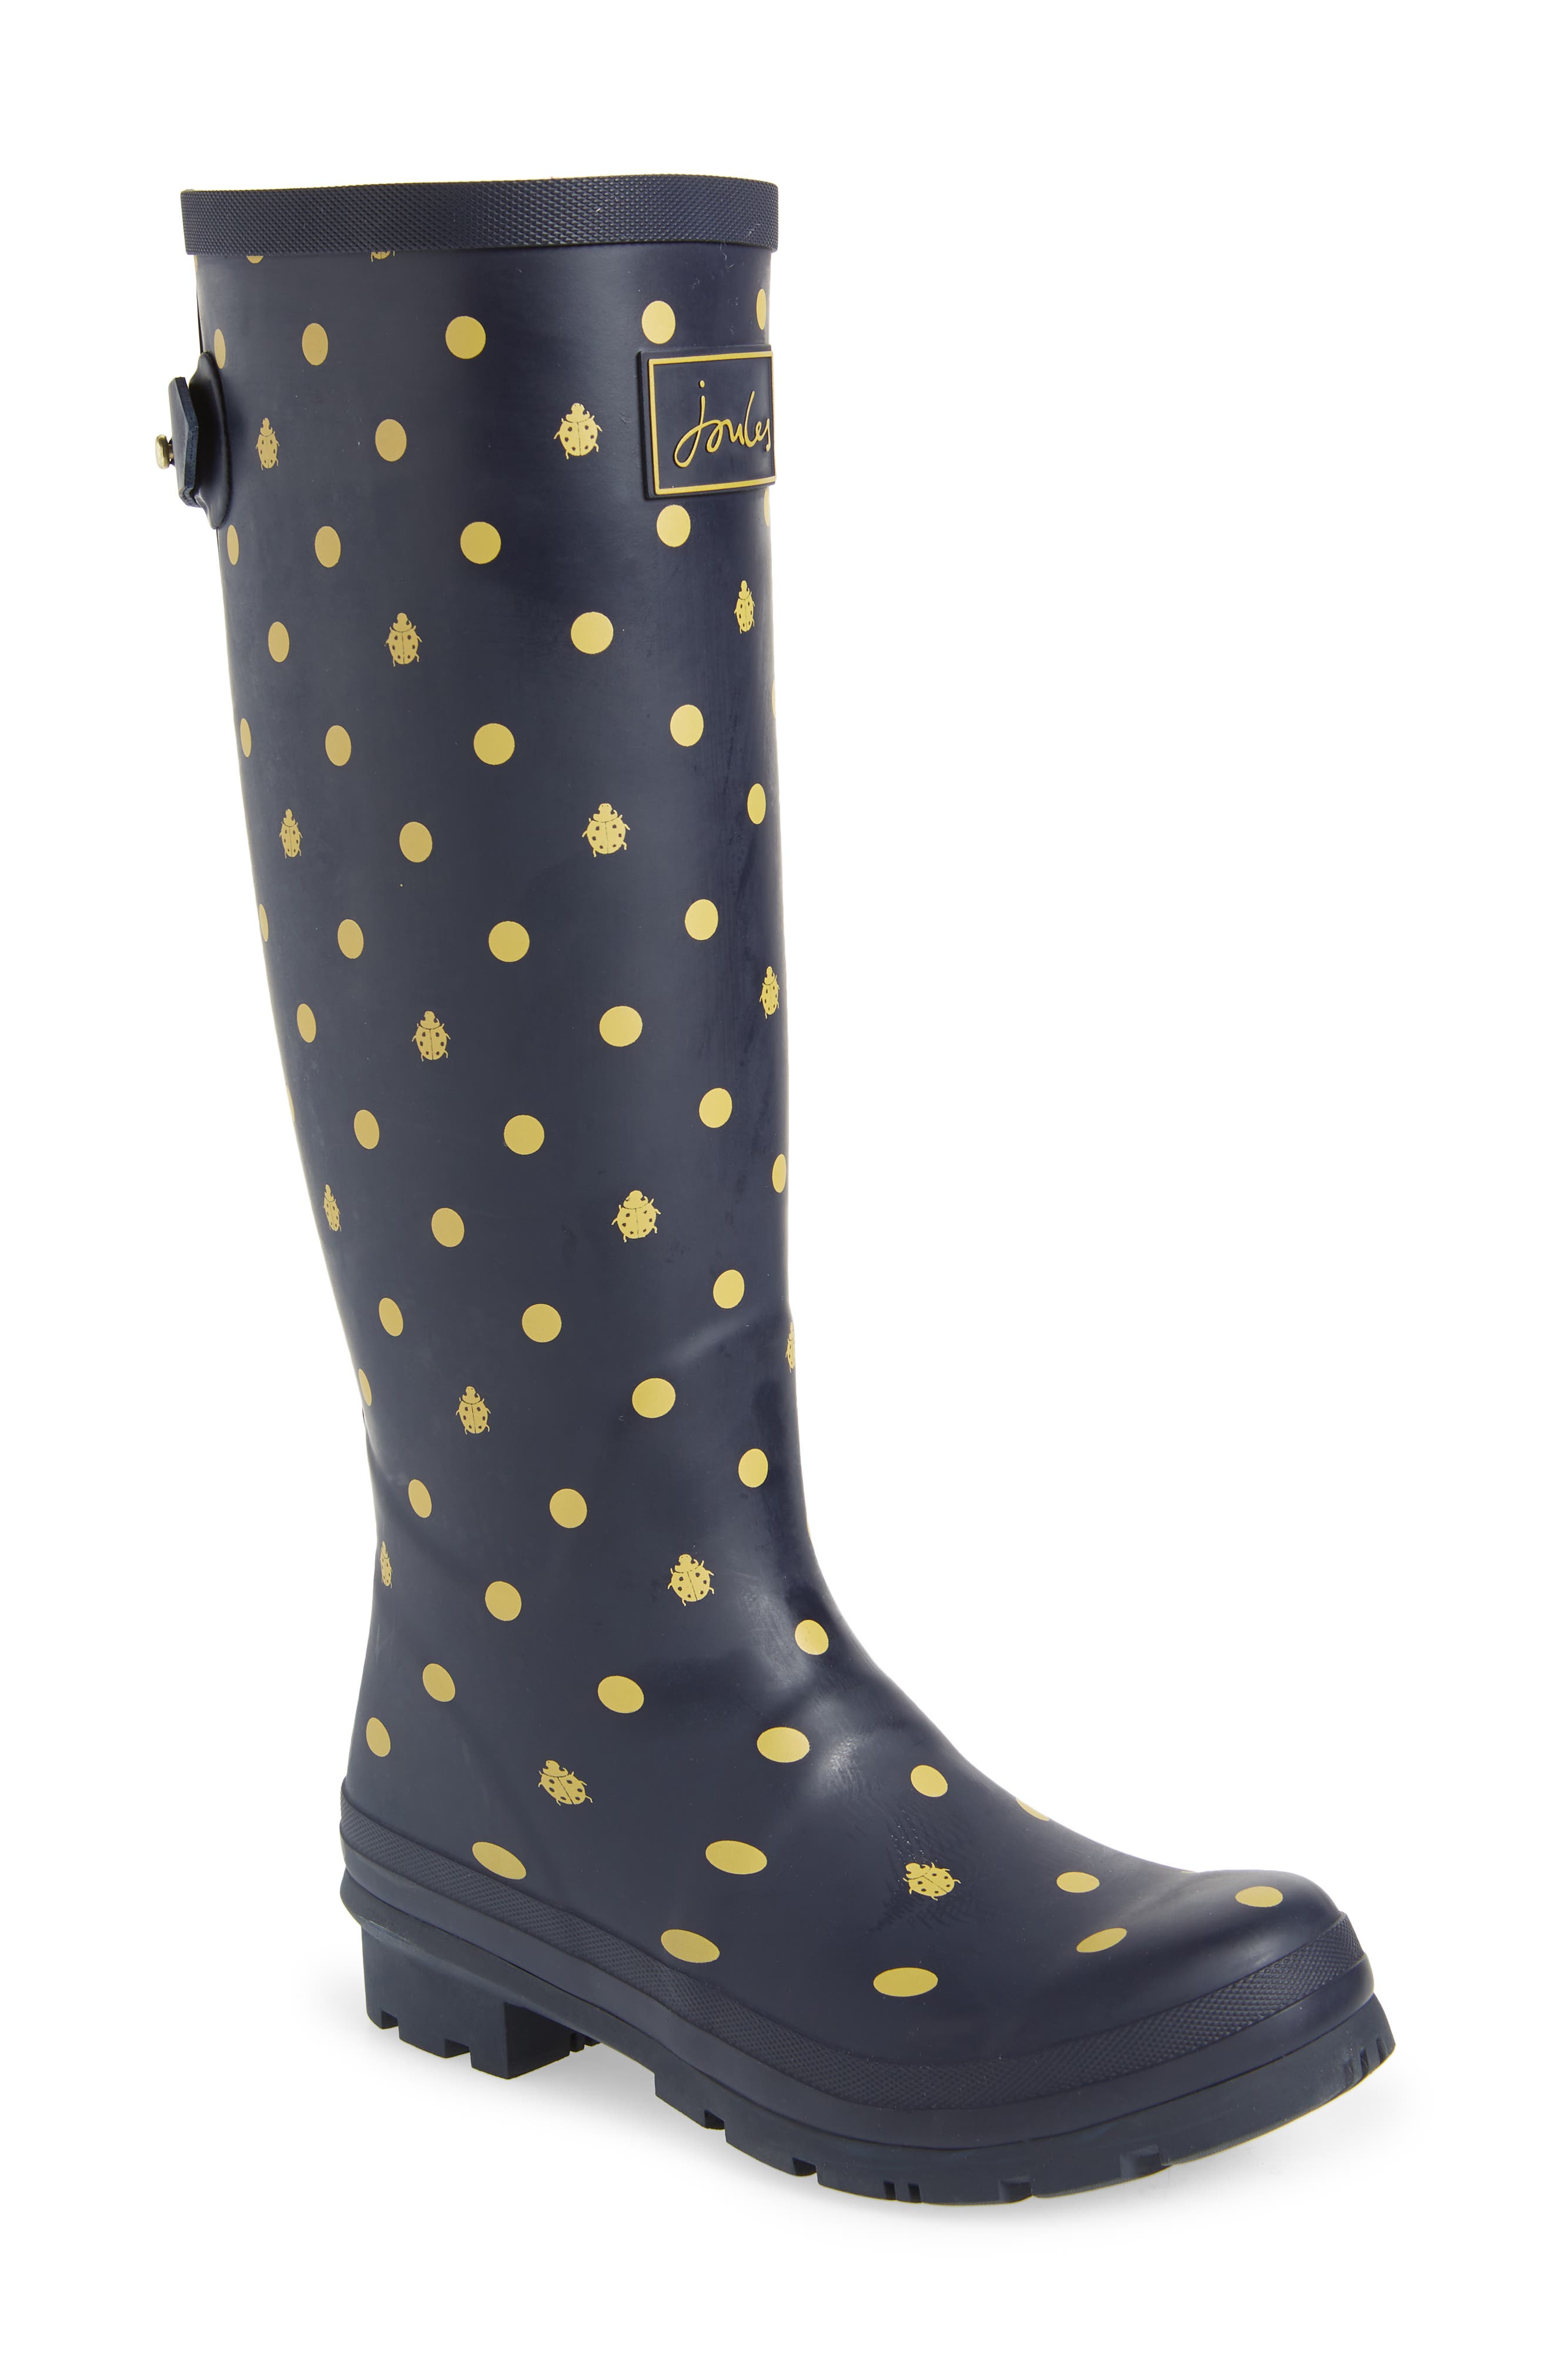 New Womens Joules Black Yellow Field Welly Rubber Boots Knee-High Pull On 